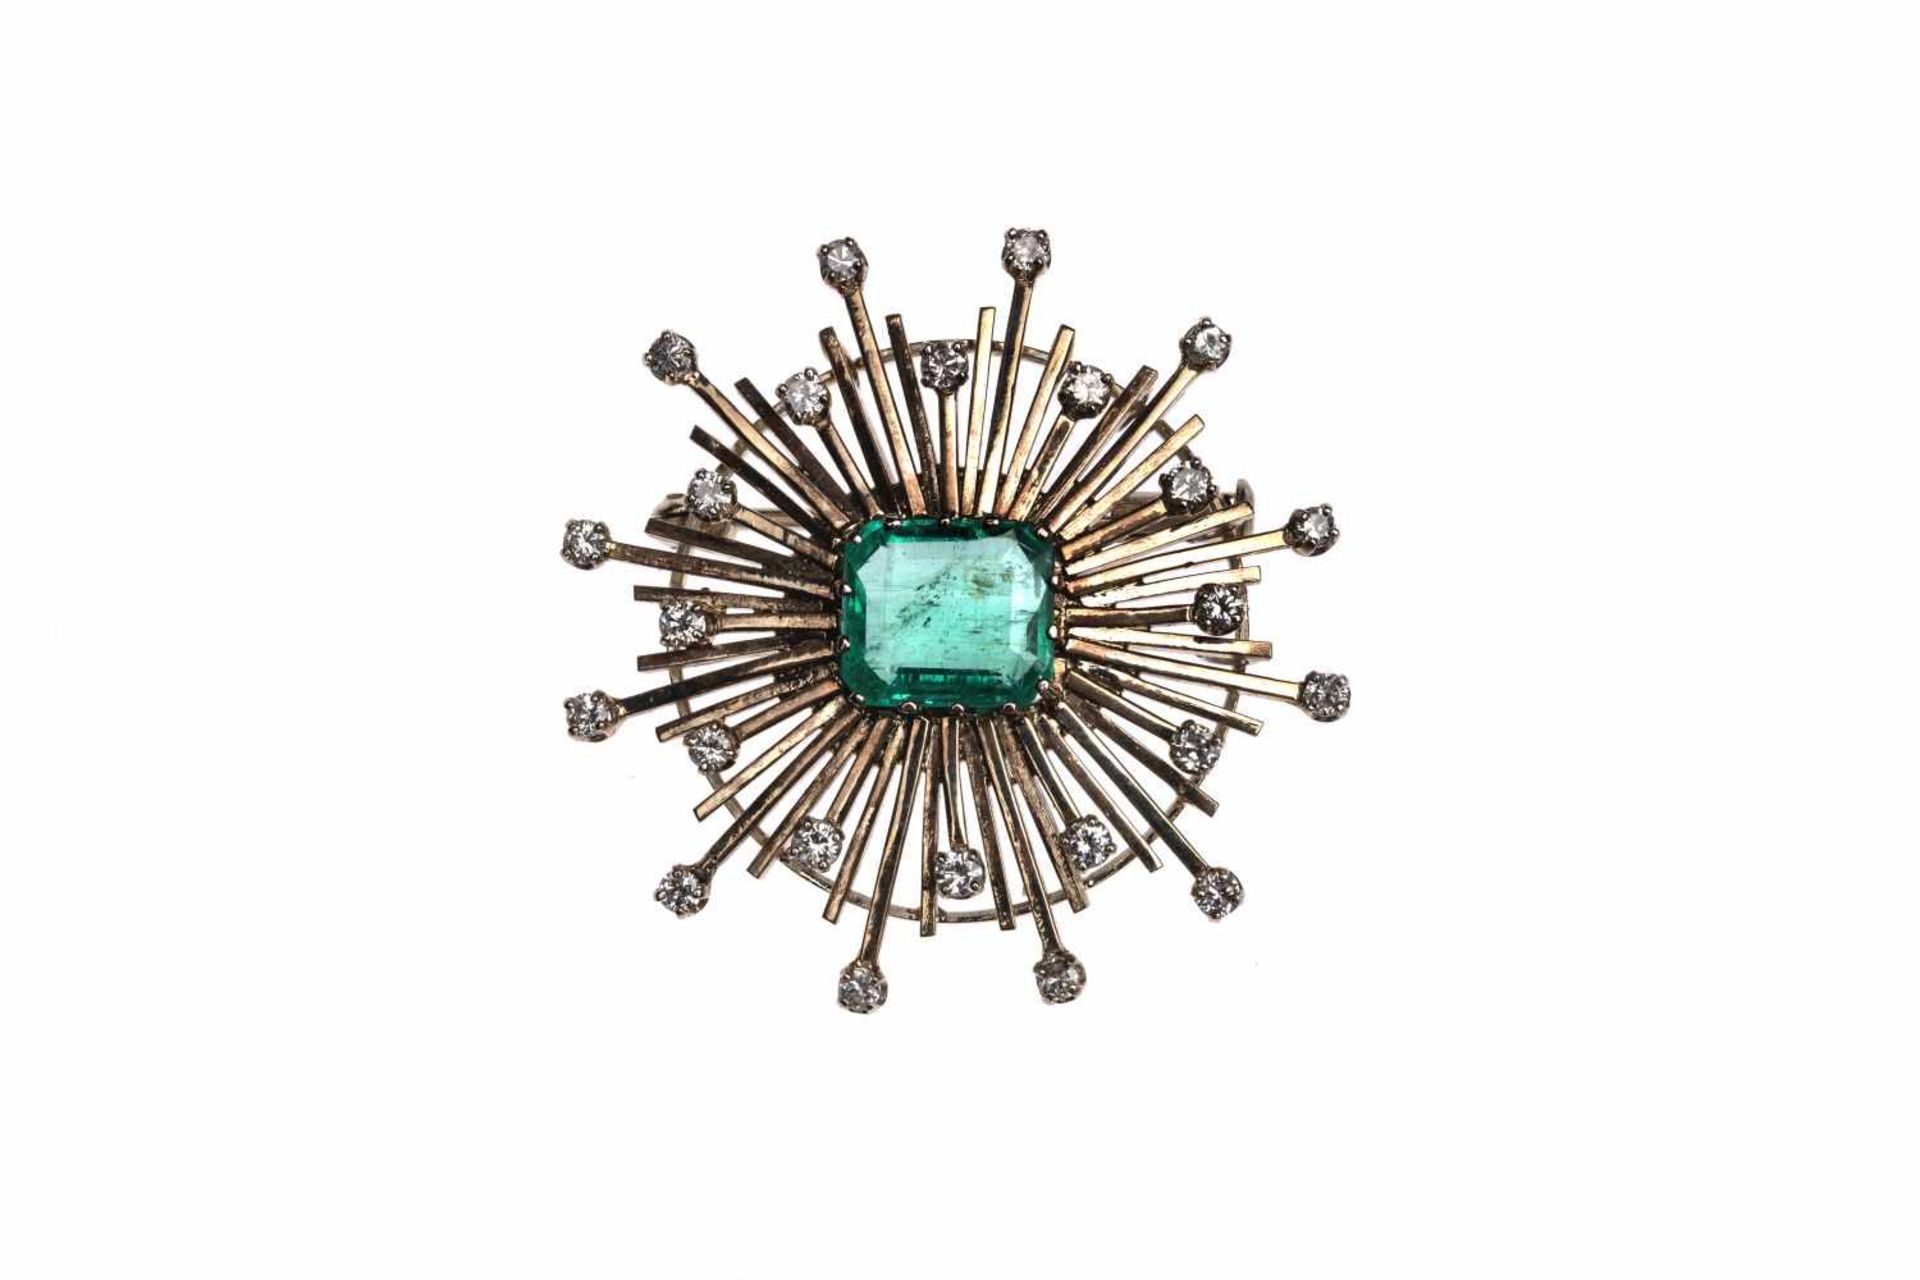 Brooch14k white gold Brooch, with brilliants total carat weight approx. 0.5 ct, and an emerald 9 x 7